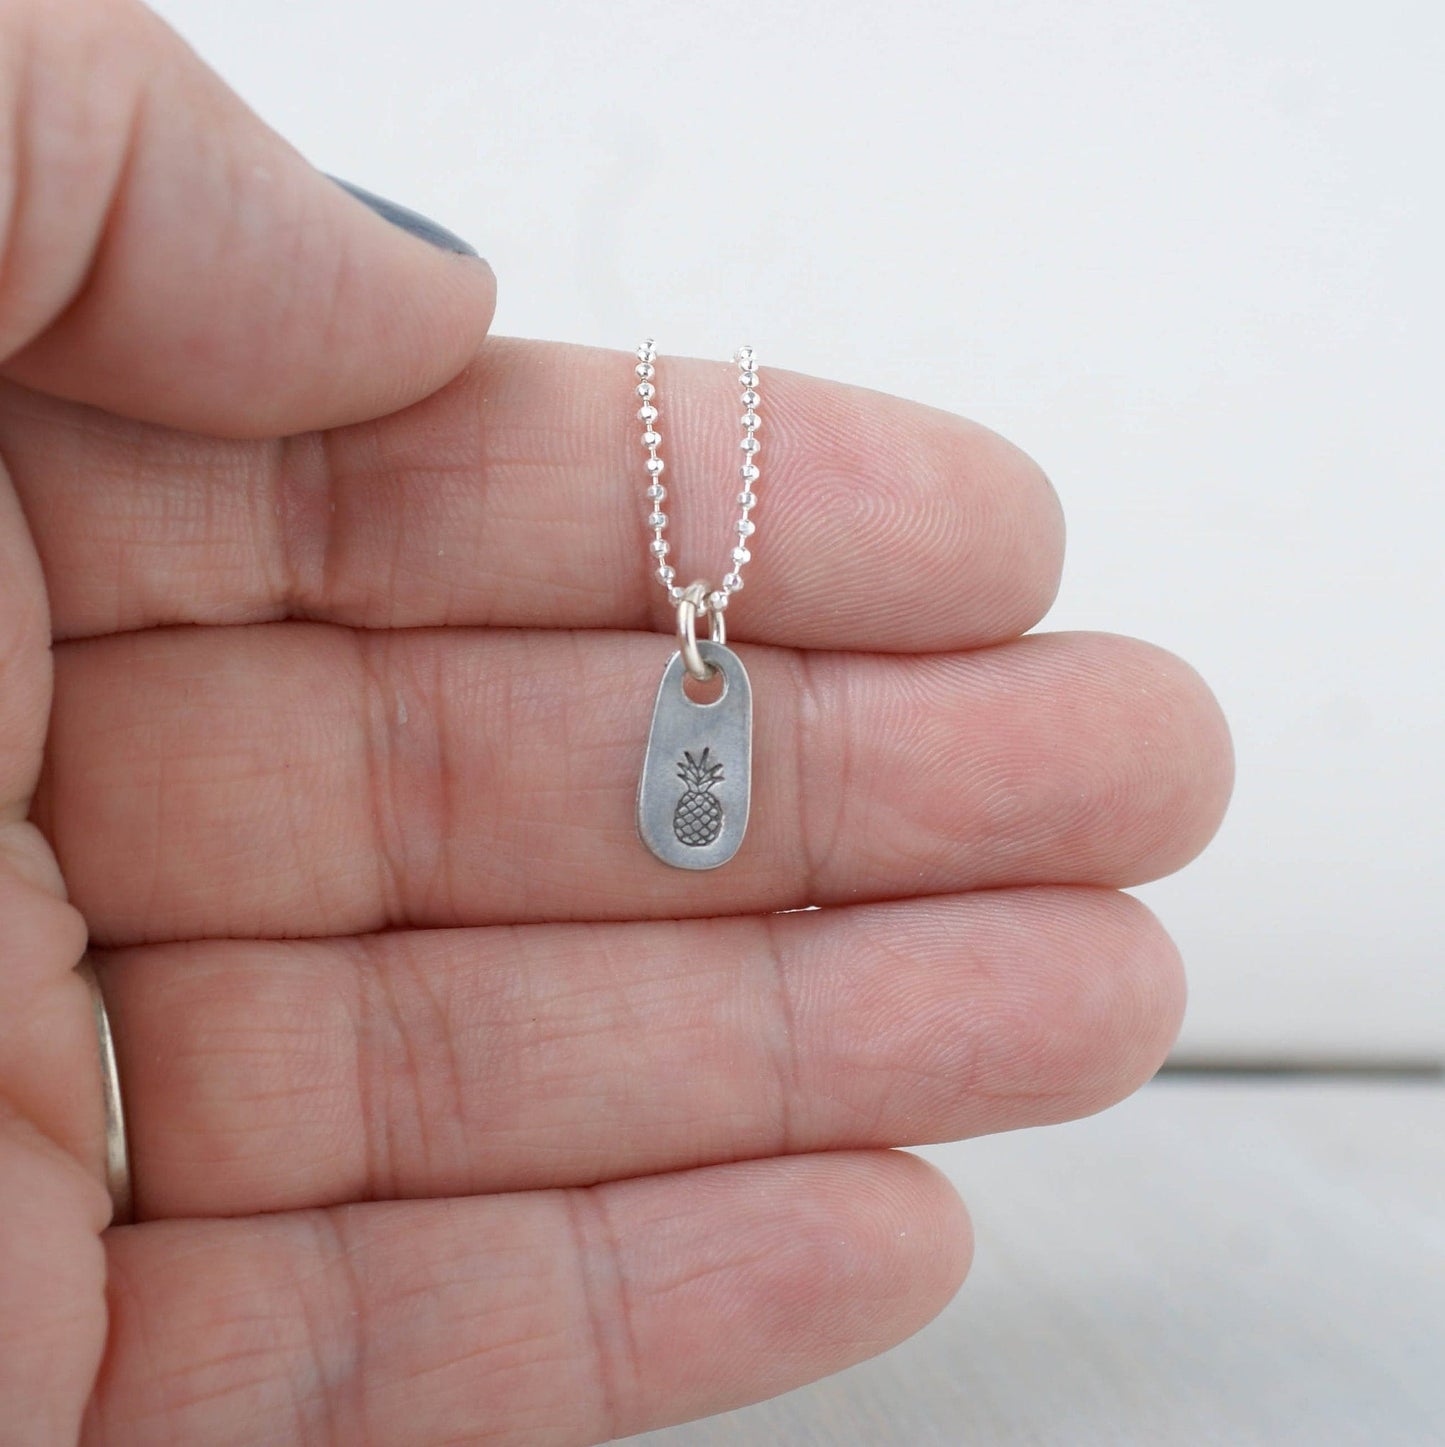 Dainty silver Pineapple necklace in artisan pewter on hand